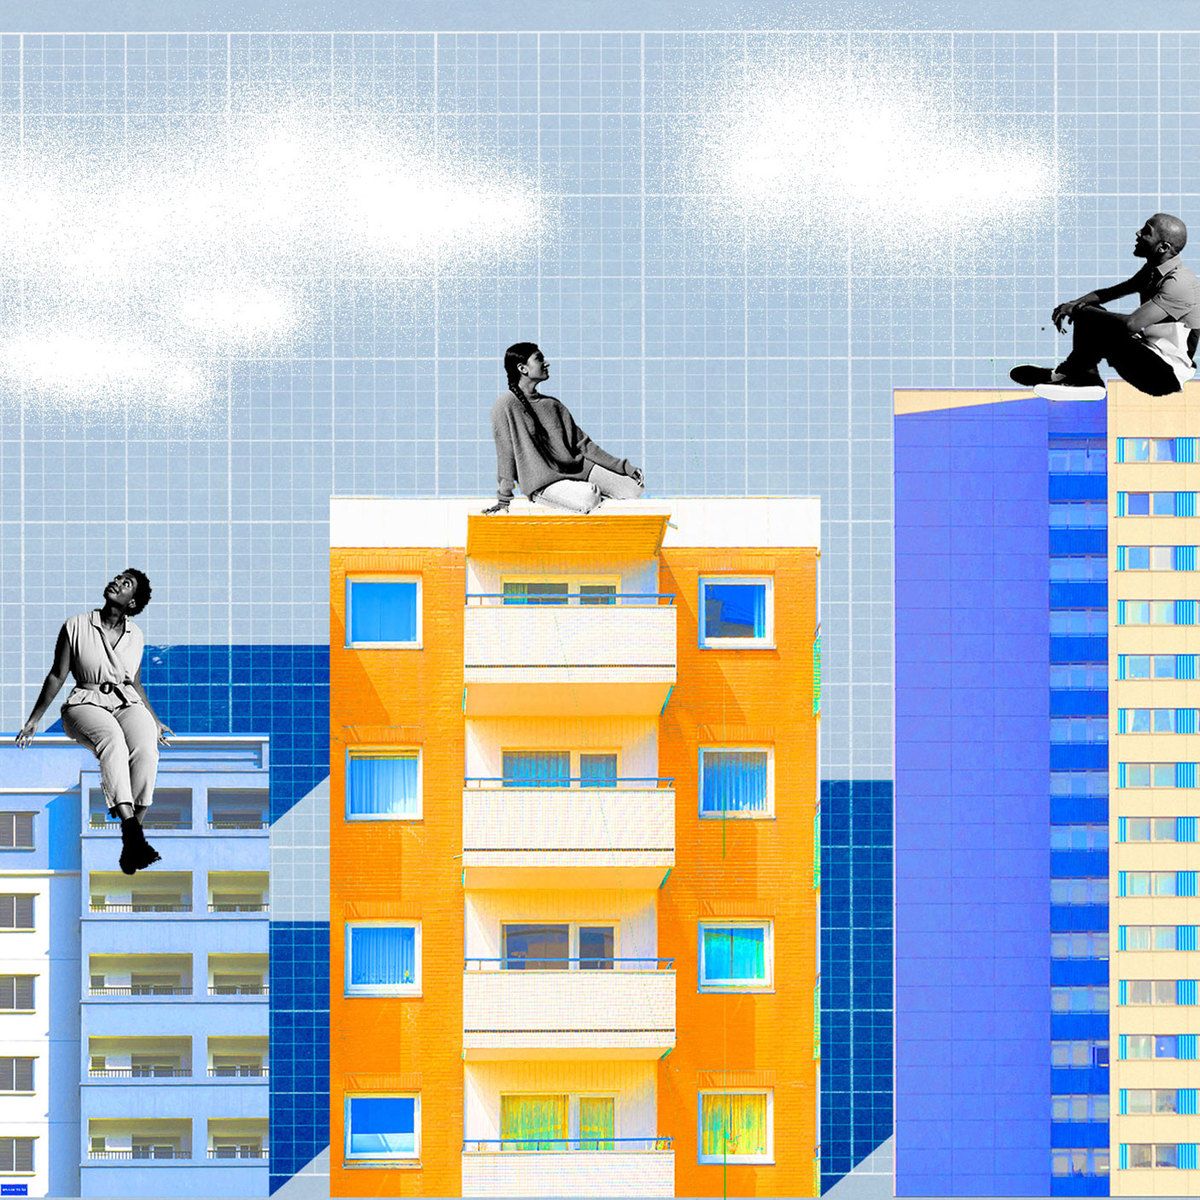 women and man sitting on top of buildings yellow and blue graph background